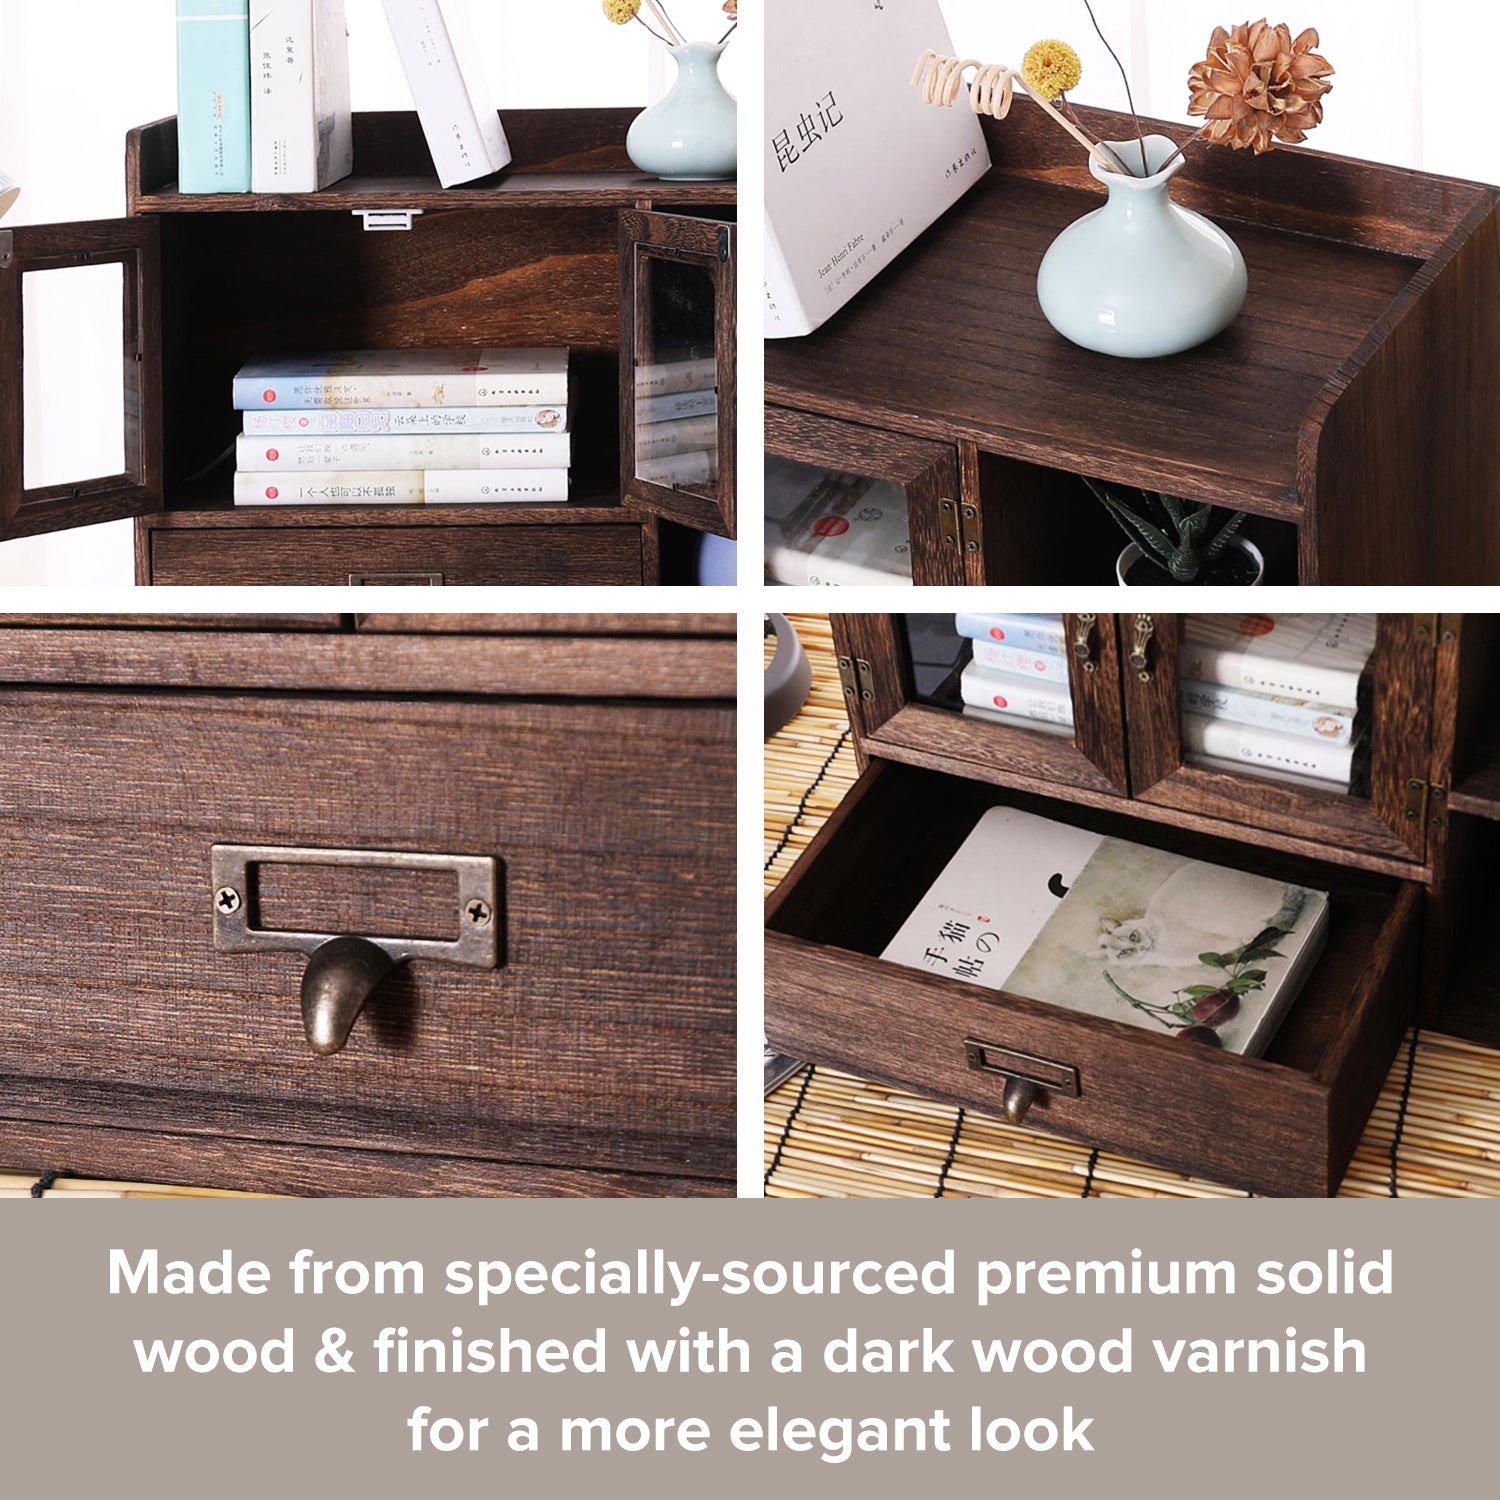 Load image into Gallery viewer, Coffee Tea Spice Station Kitchen Organizer Cabinet | Wood Desk Table Top Pantry Storage